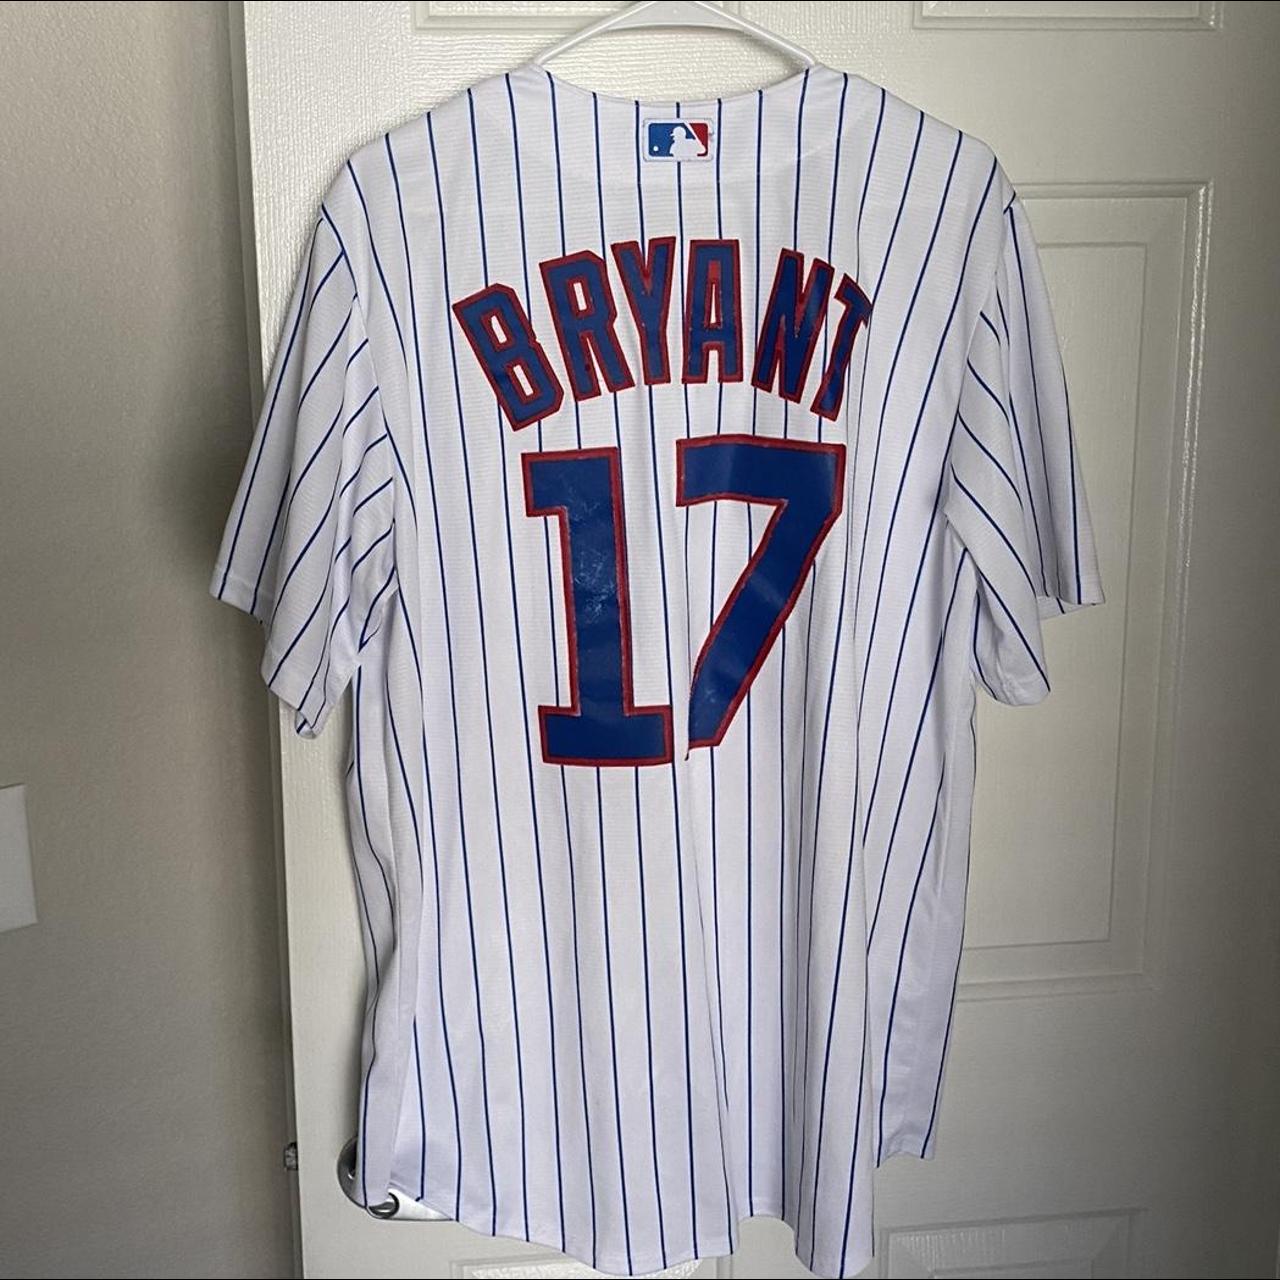 Chicago Cubs MLB JERSEY Kris Bryant. Size Youth - Depop